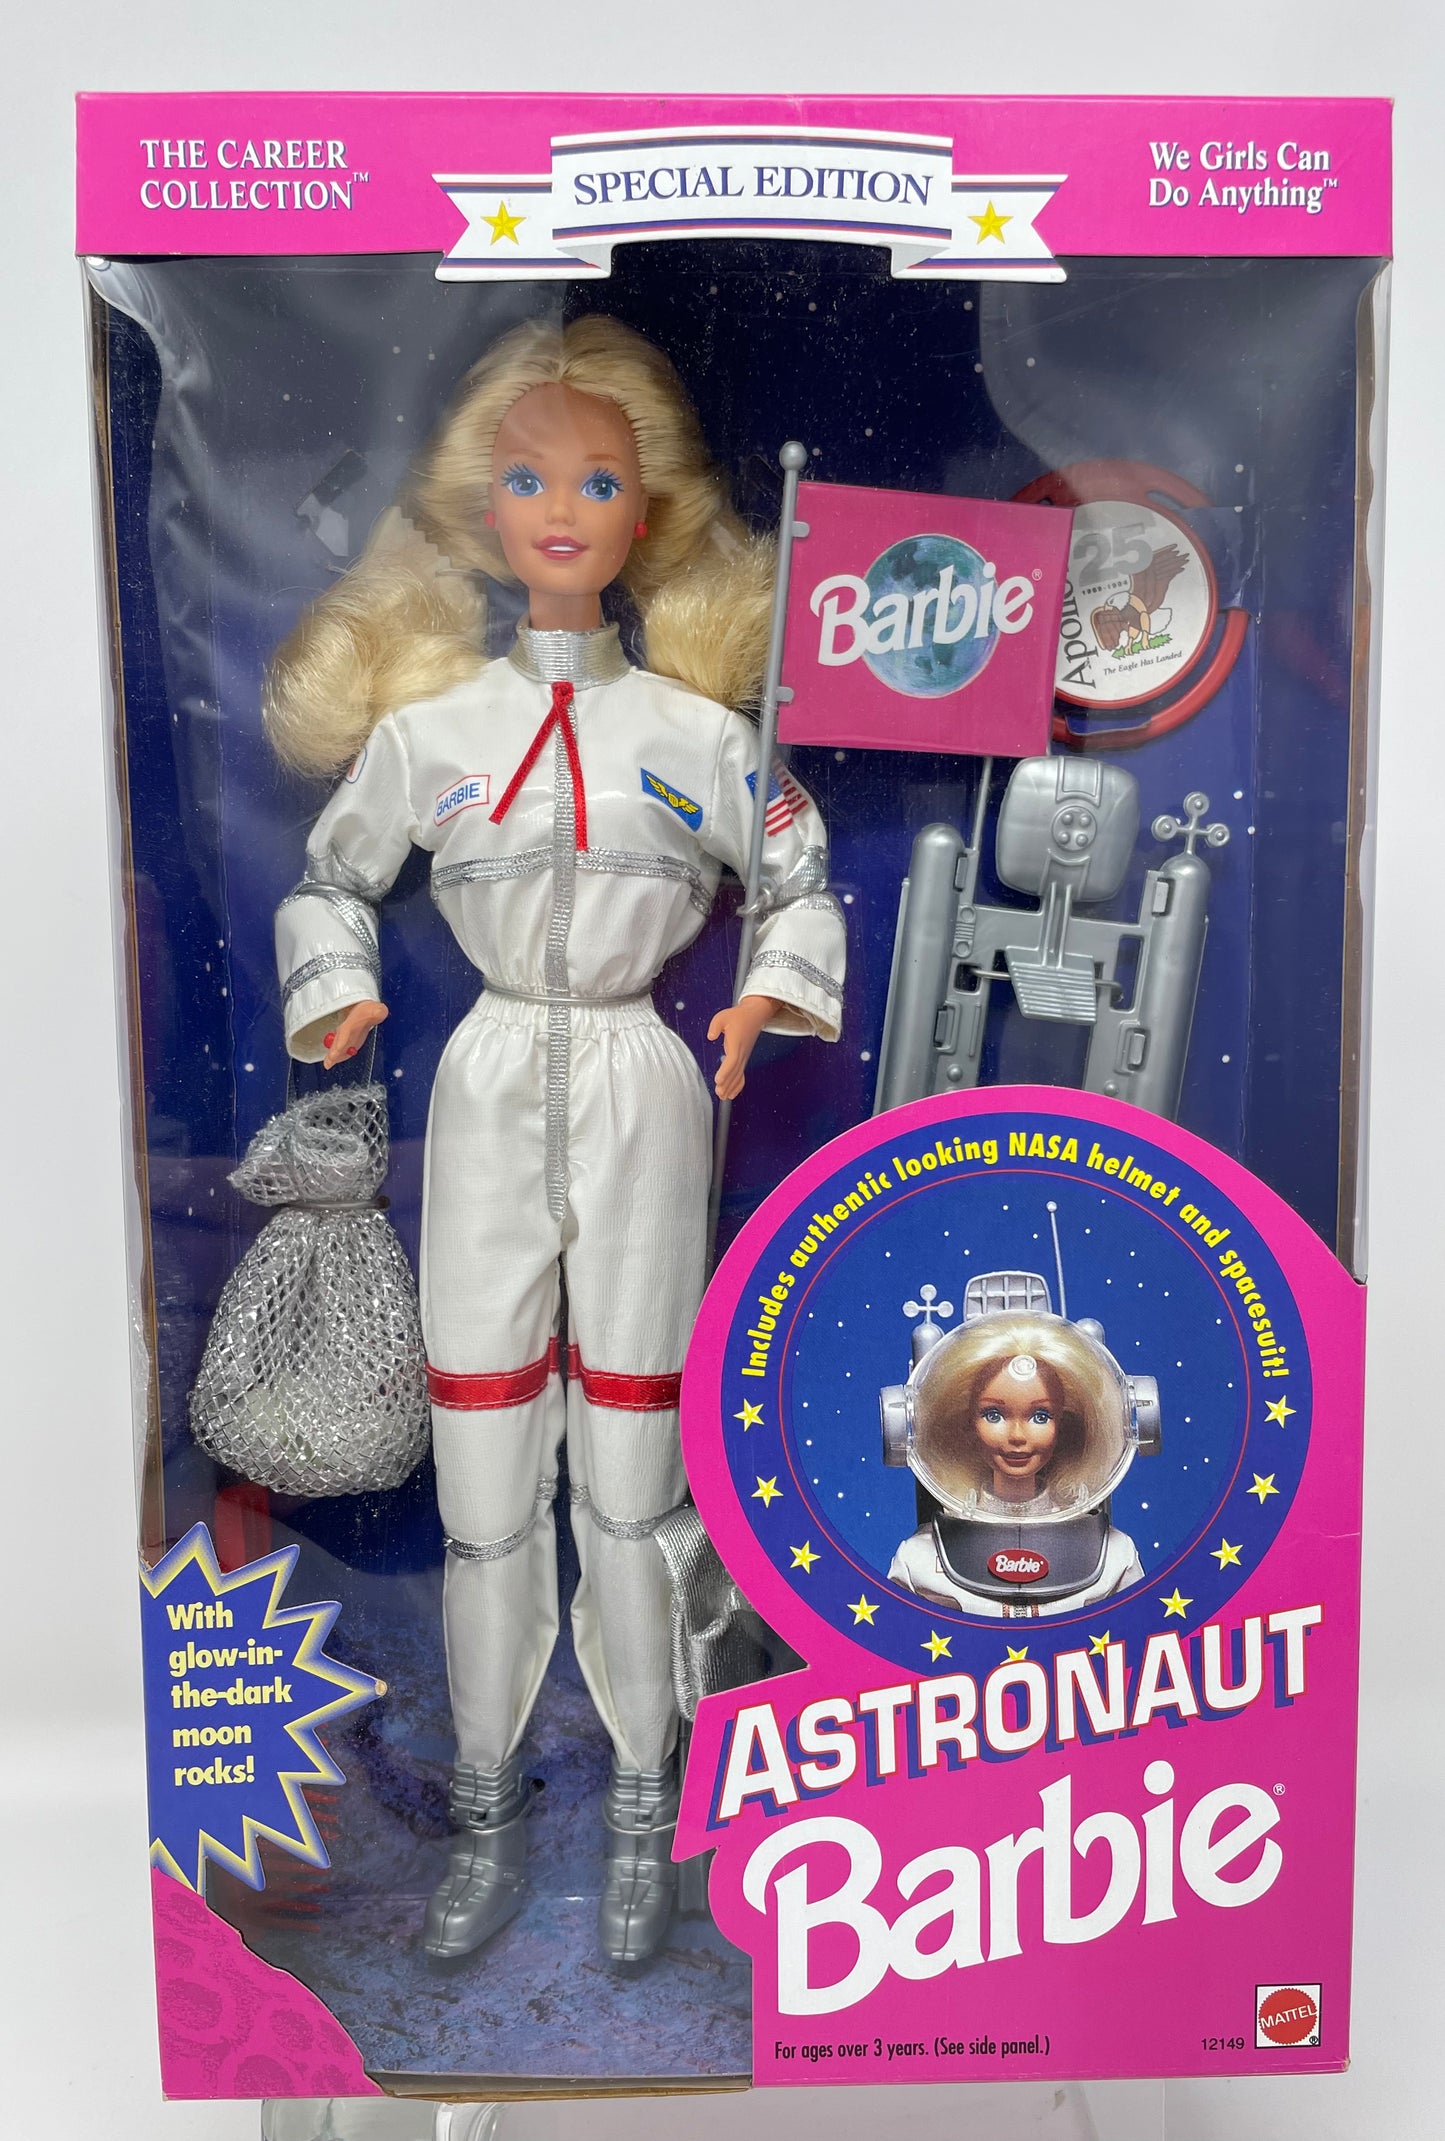 ASTRONAUT BARBIE - BLONDE - SPECIAL EDITION - THE CAREER COLLECTION - #12149 - MATTEL 1994